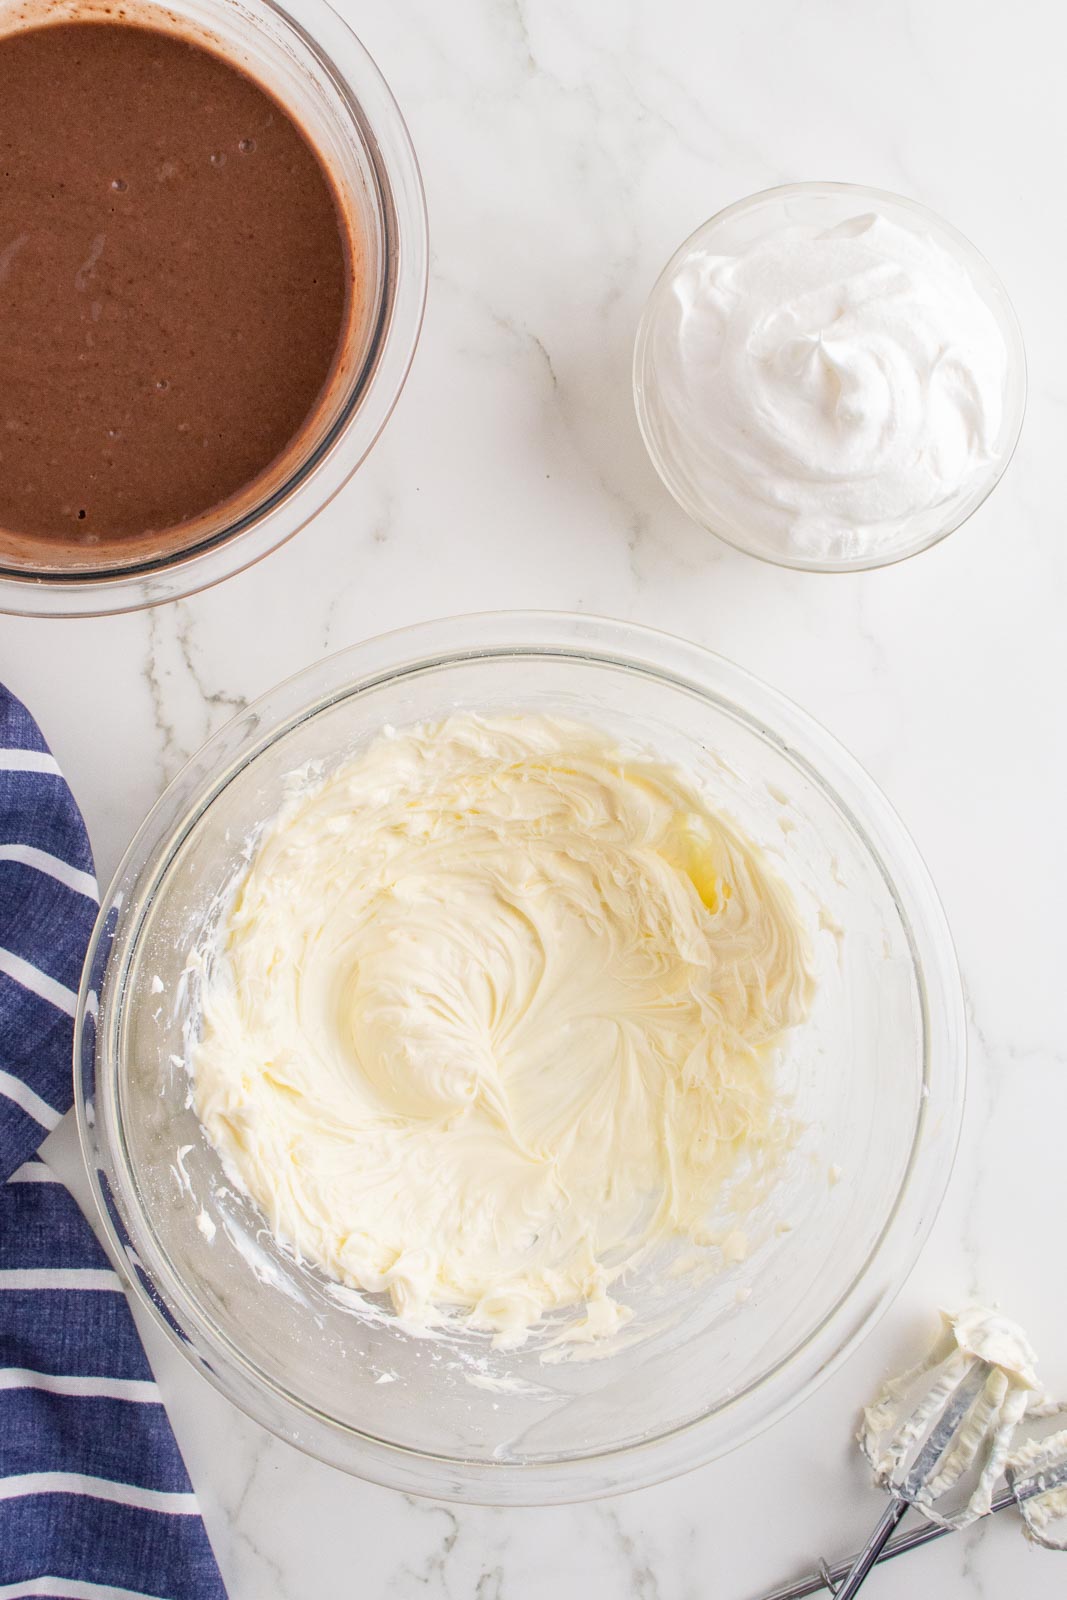 Beating together cream cheese and powdered sugar in a mixing bowl.